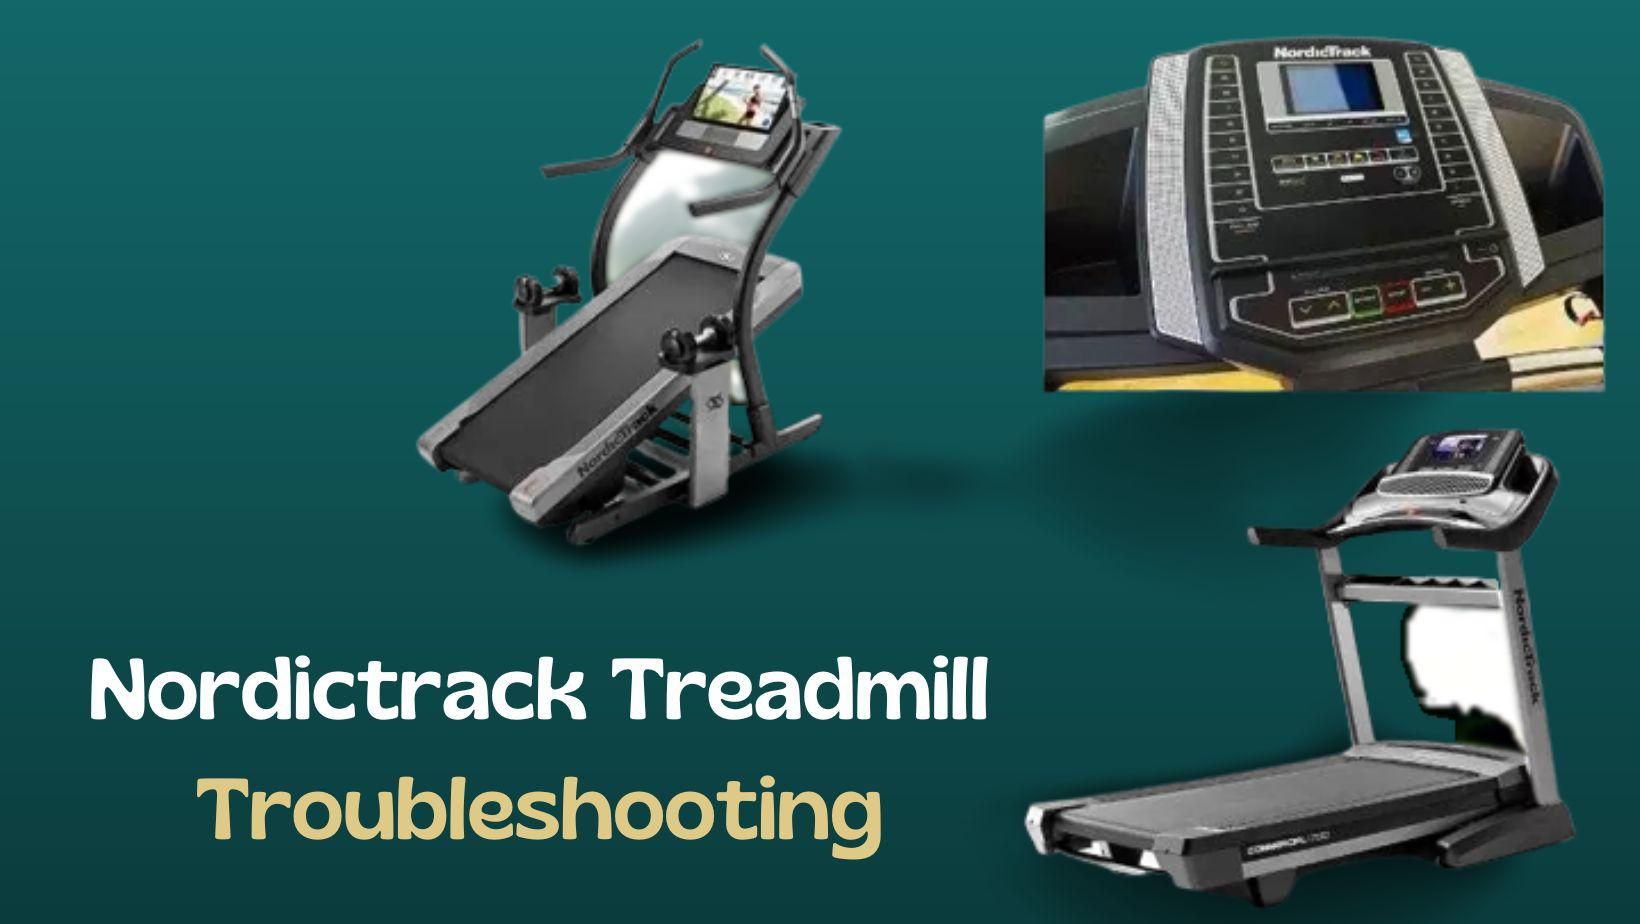 Nordictrack Treadmill Troubleshooting